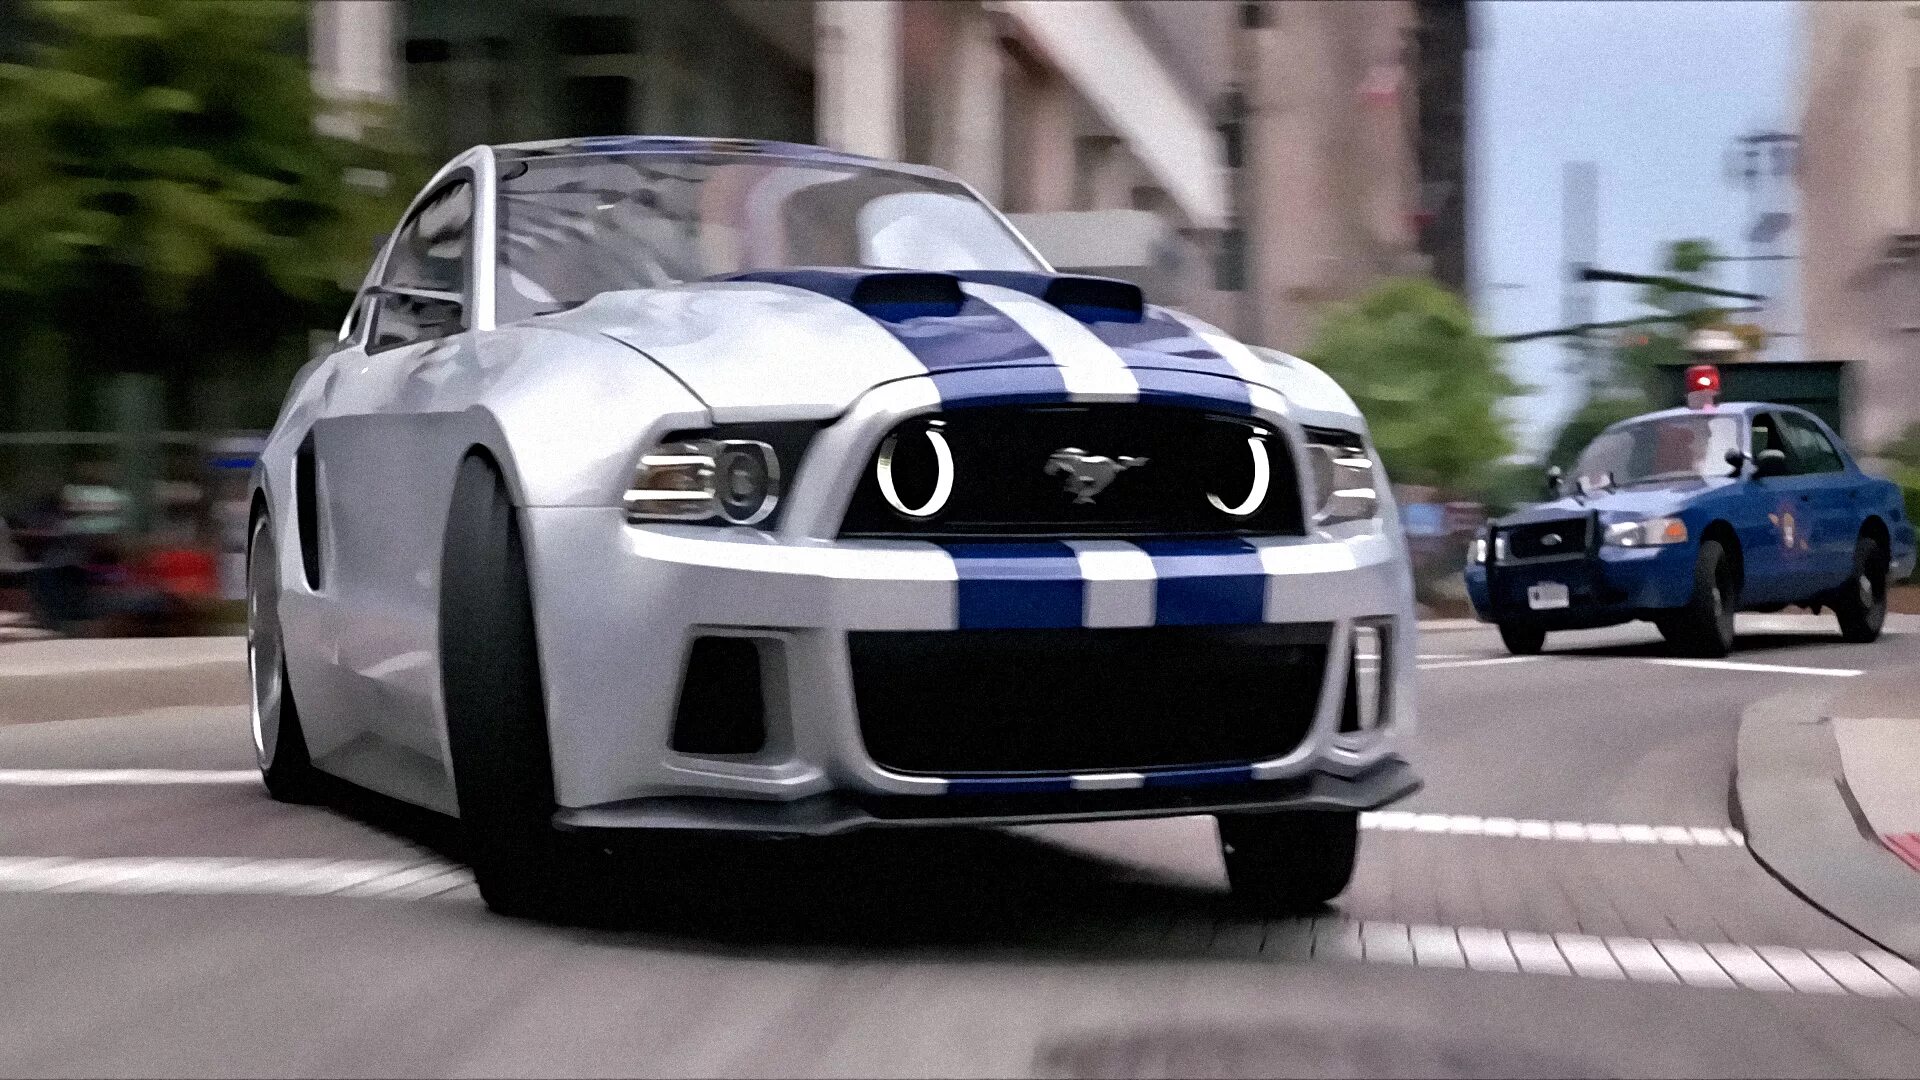 Ford Mustang NFS. Ford Mustang Shelby gt500 NFS. Форд Мустанг жажда скорости. Форд Мустанг нфс жажда скорости. Про машины скорости